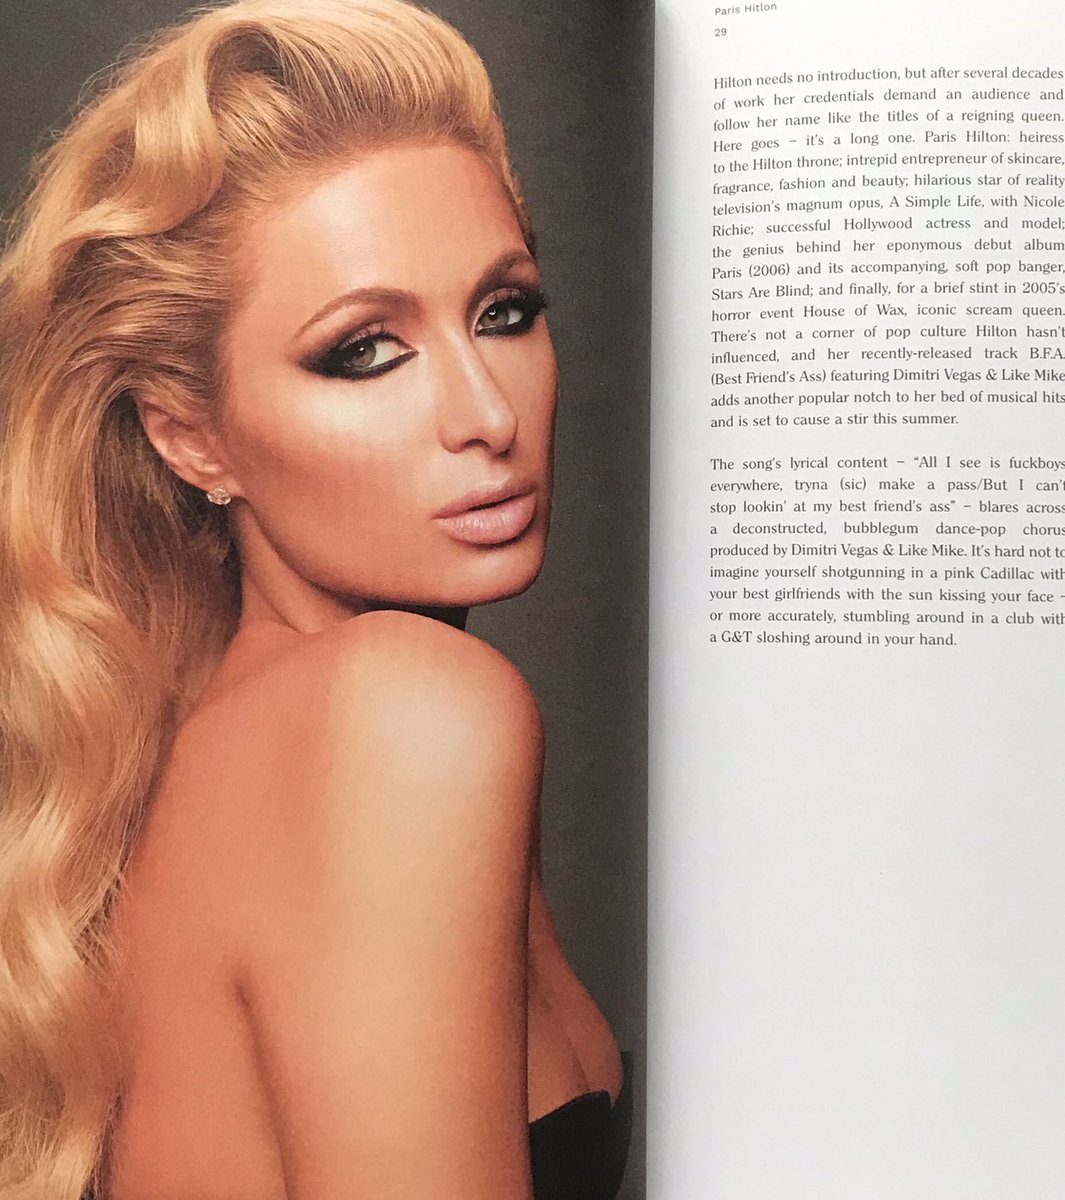 RT @otisarobinson: Cover feature interview with @ParisHilton for @tmrwmag ???????? https://t.co/haNN2gBViu